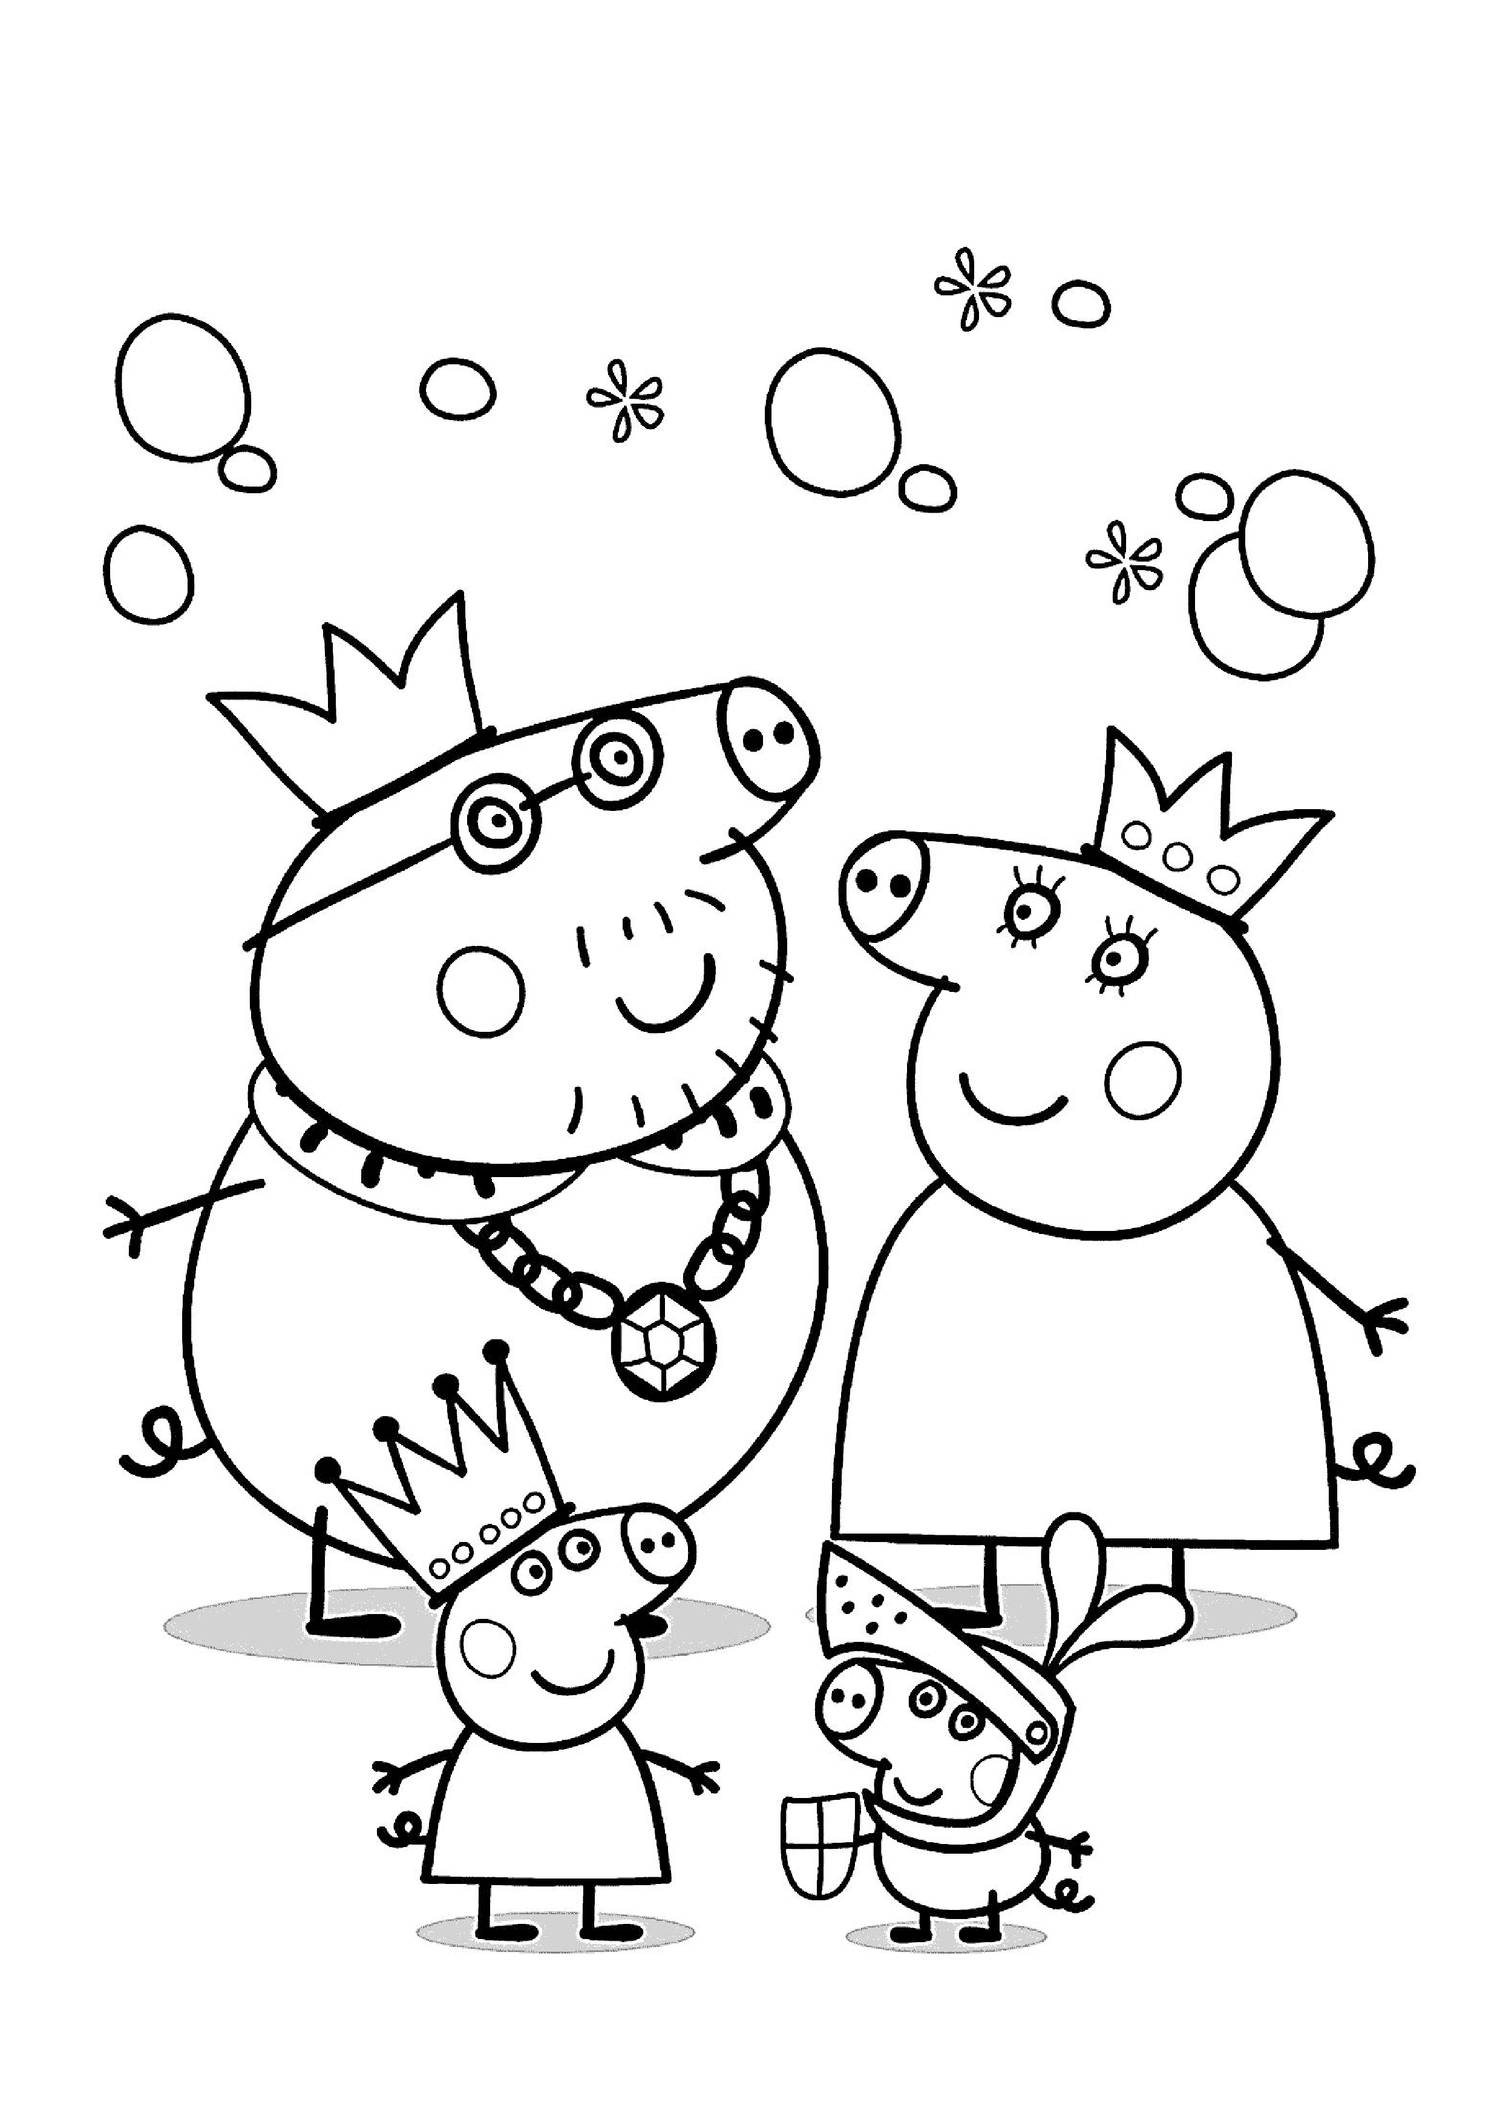 Peppa Pig Coloring Pages